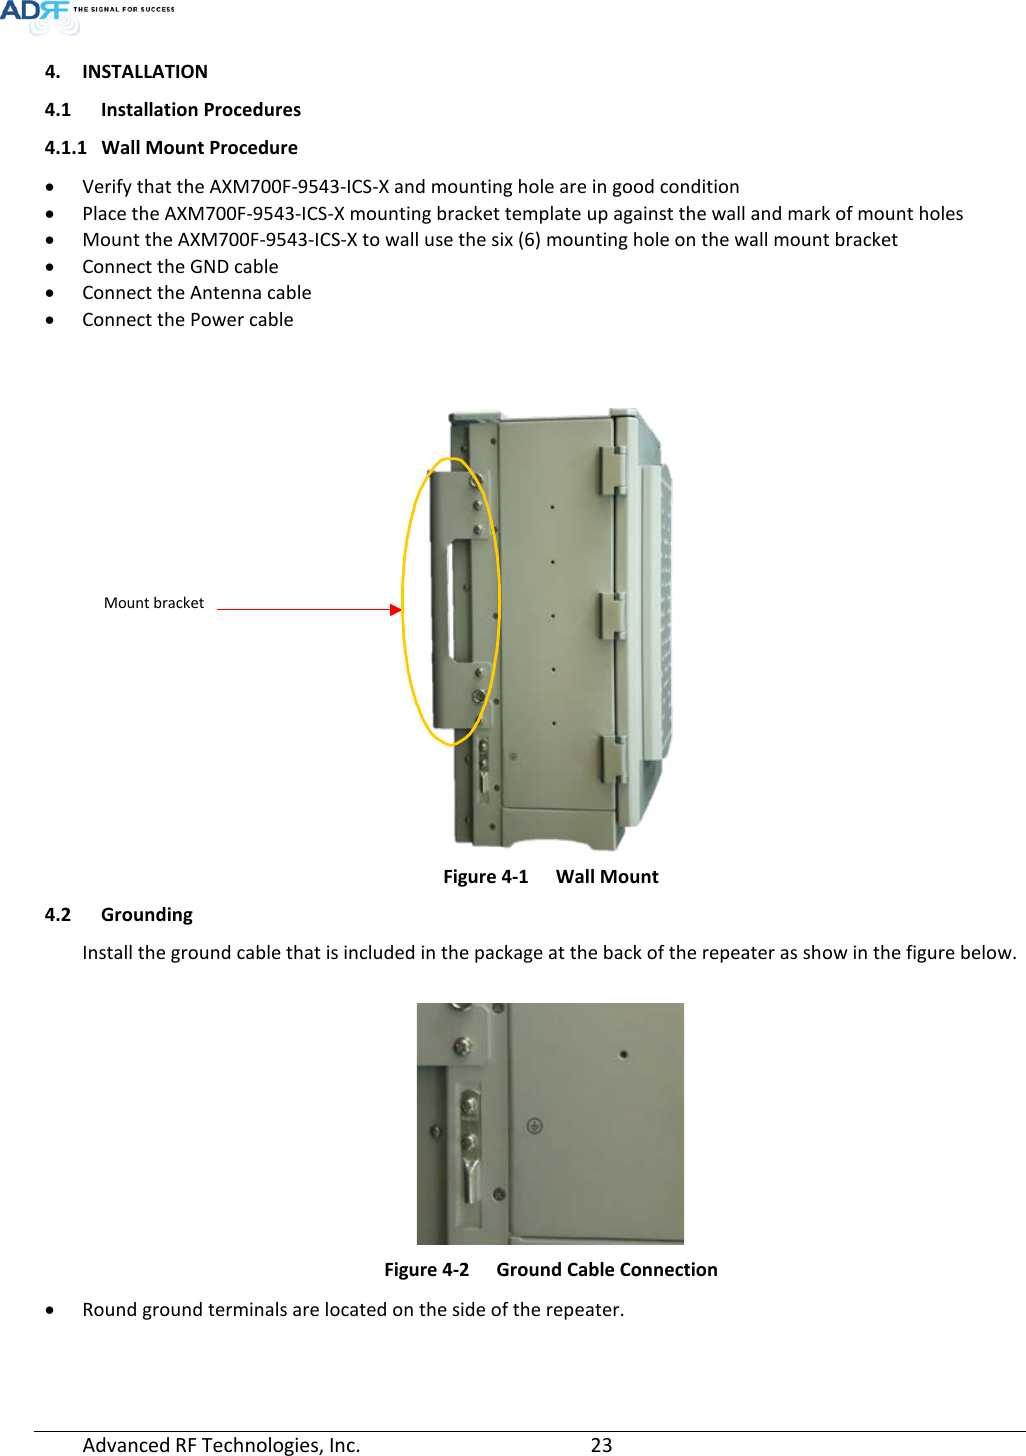  Advanced RF Technologies, Inc.       23   4. INSTALLATION 4.1 Installation Procedures 4.1.1 Wall Mount Procedure • Verify that the AXM700F-9543-ICS-X and mounting hole are in good condition • Place the AXM700F-9543-ICS-X mounting bracket template up against the wall and mark of mount holes • Mount the AXM700F-9543-ICS-X to wall use the six (6) mounting hole on the wall mount bracket • Connect the GND cable • Connect the Antenna cable • Connect the Power cable    Figure 4-1  Wall Mount 4.2 Grounding Install the ground cable that is included in the package at the back of the repeater as show in the figure below.   Figure 4-2  Ground Cable Connection • Round ground terminals are located on the side of the repeater.     Mount bracket 